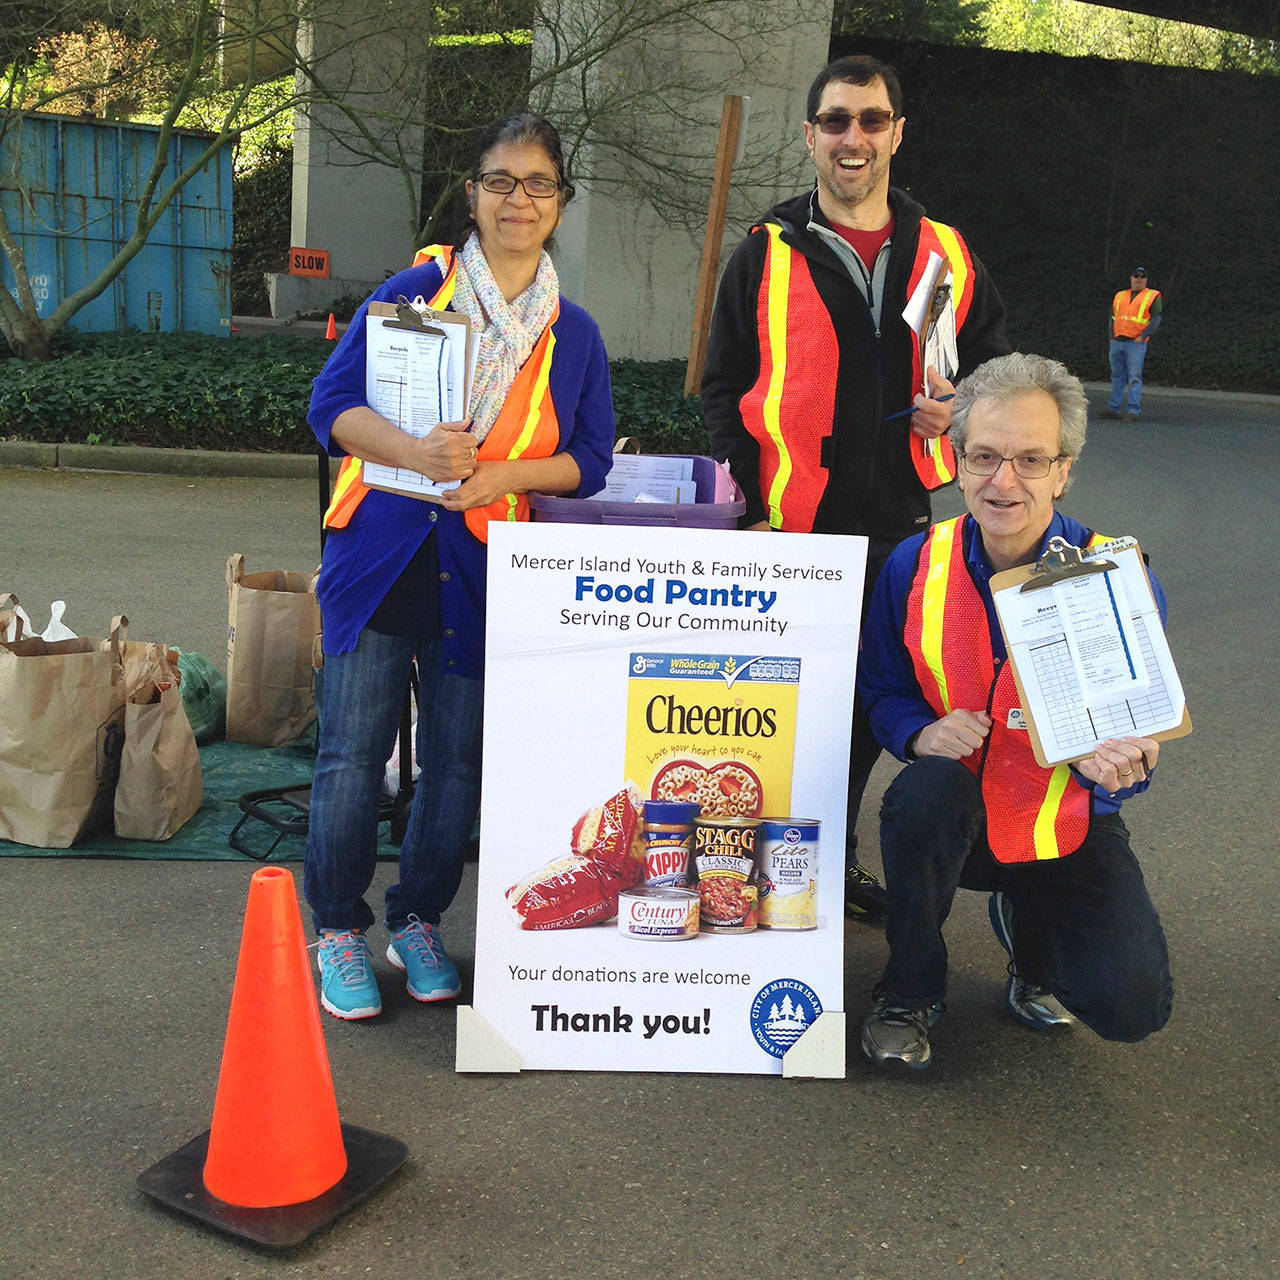 Volunteers for Mercer Island Youth and Family Services do a donation drive for the food pantry, which is visited close to 1,500 times each year. Courtesy photo